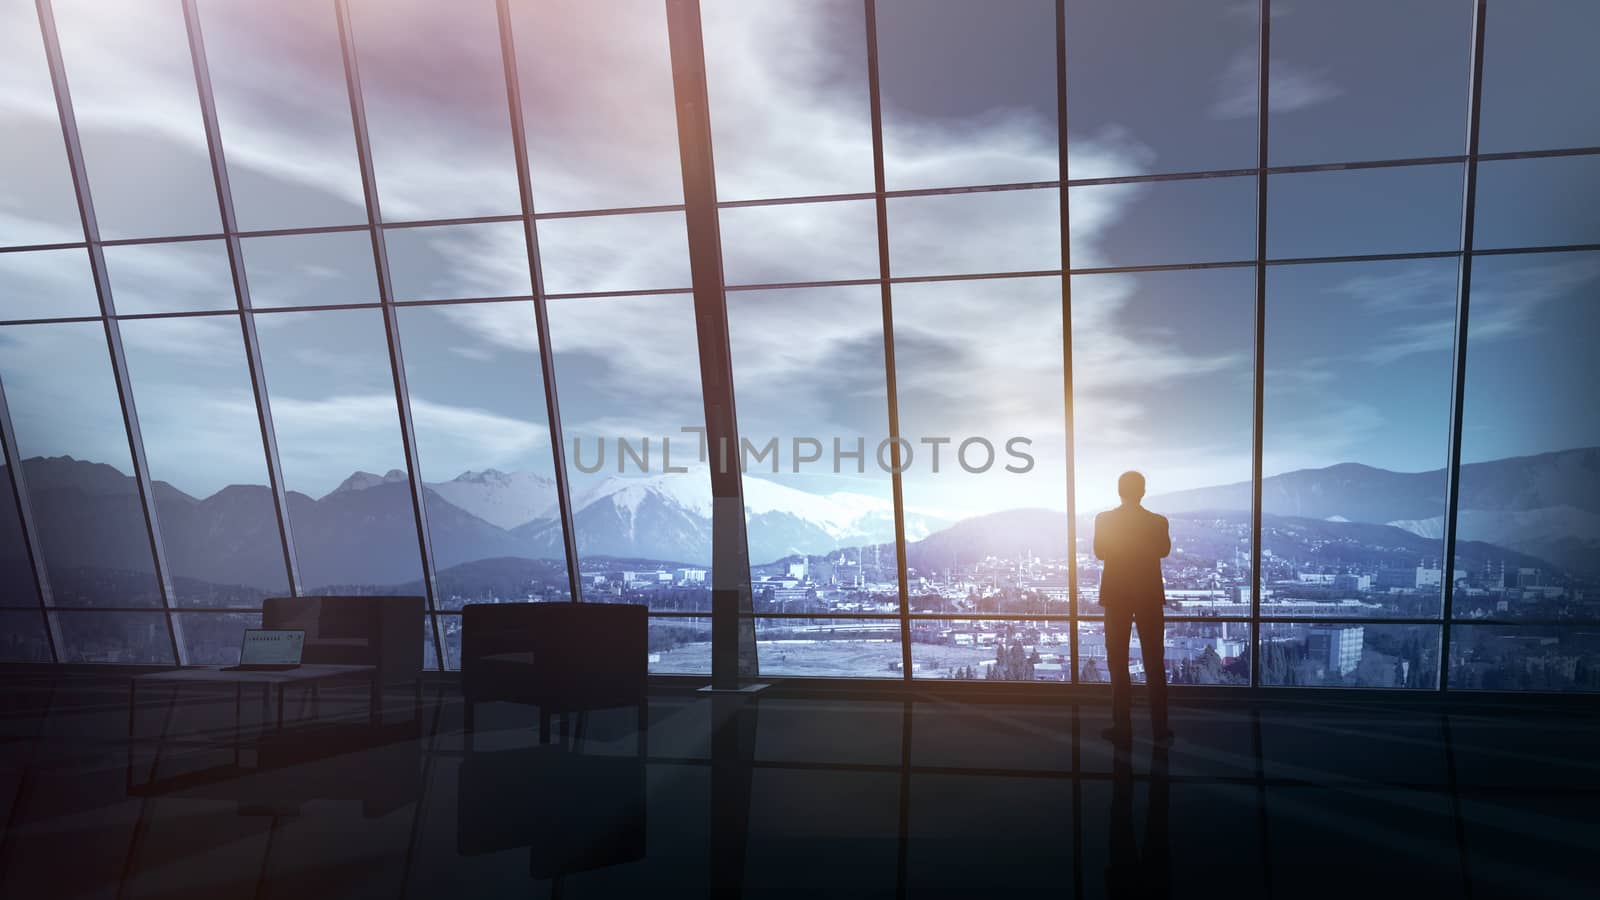 A businessman in his office looks through a large panoramic window overlooking the snow-capped peaks of the mountains.